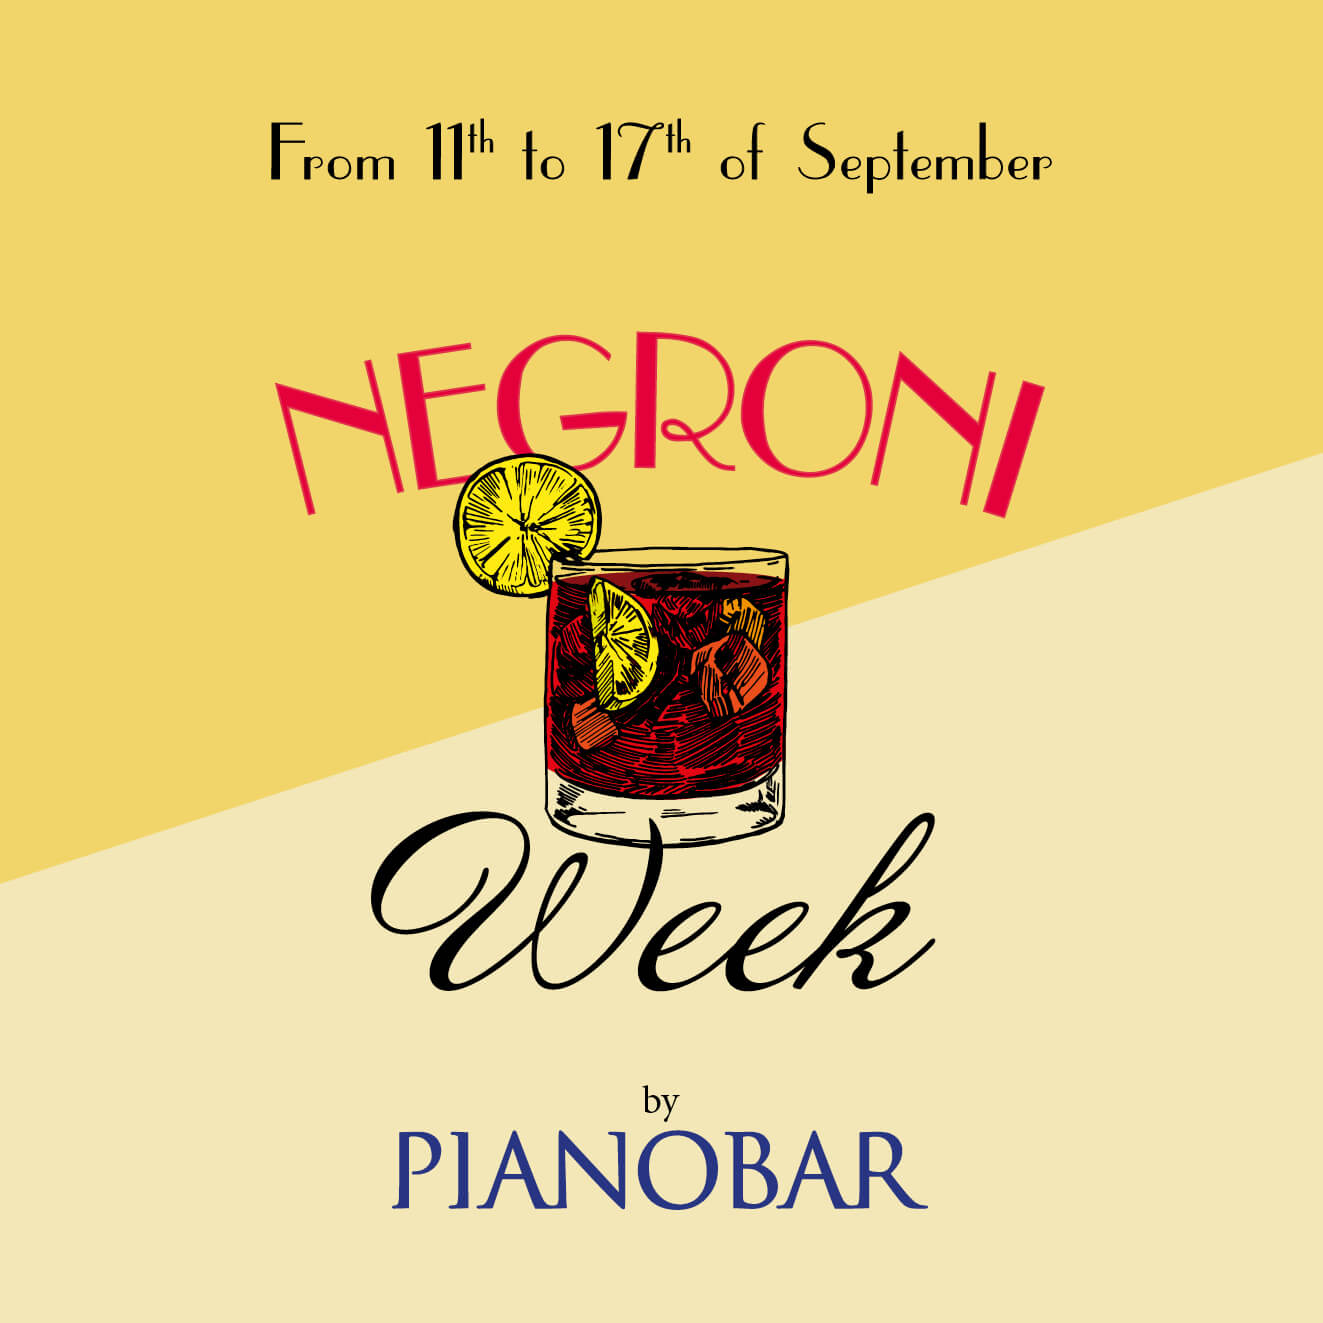 Celebrate Negroni Week at the Piano Bar of the Hôtel Le Royal !